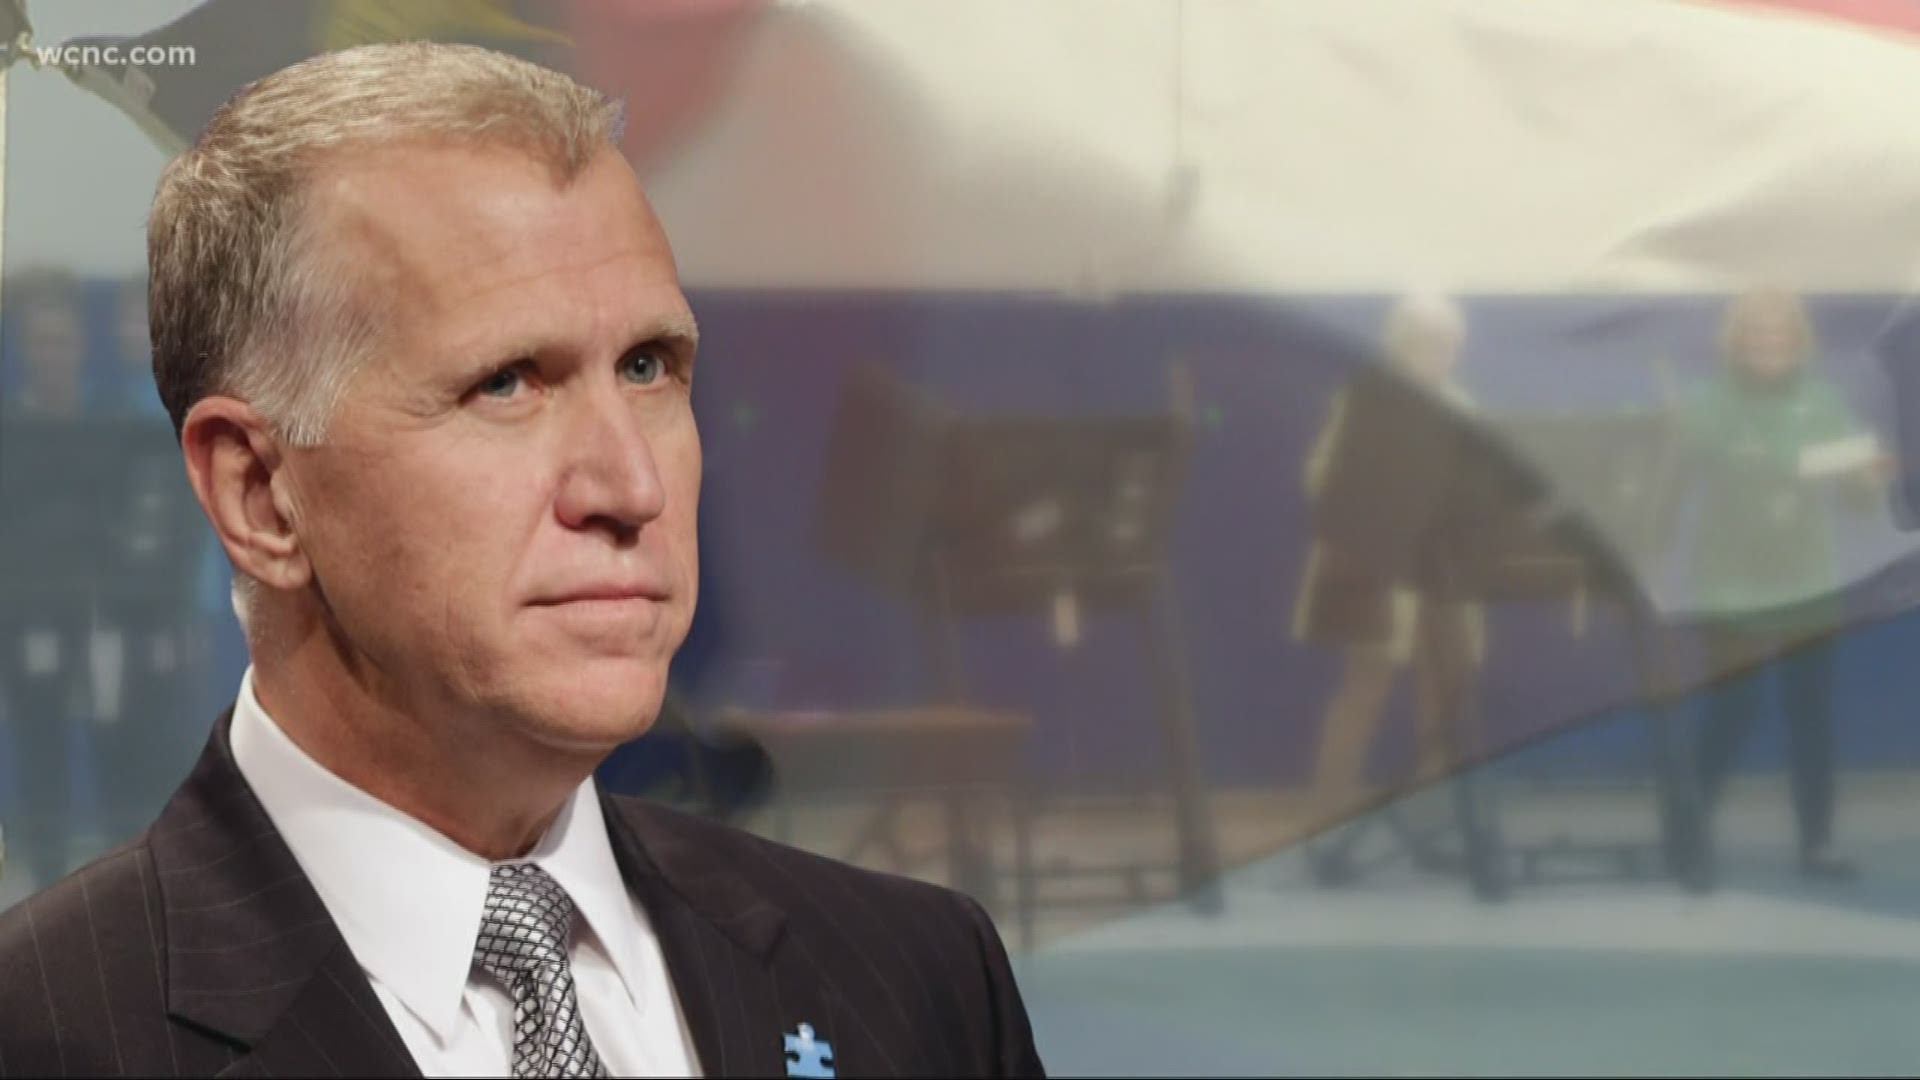 A poll out this month shows 31 percent of respondents approve of the way Senator Tillis is handling his job. 35 percent disapproved.